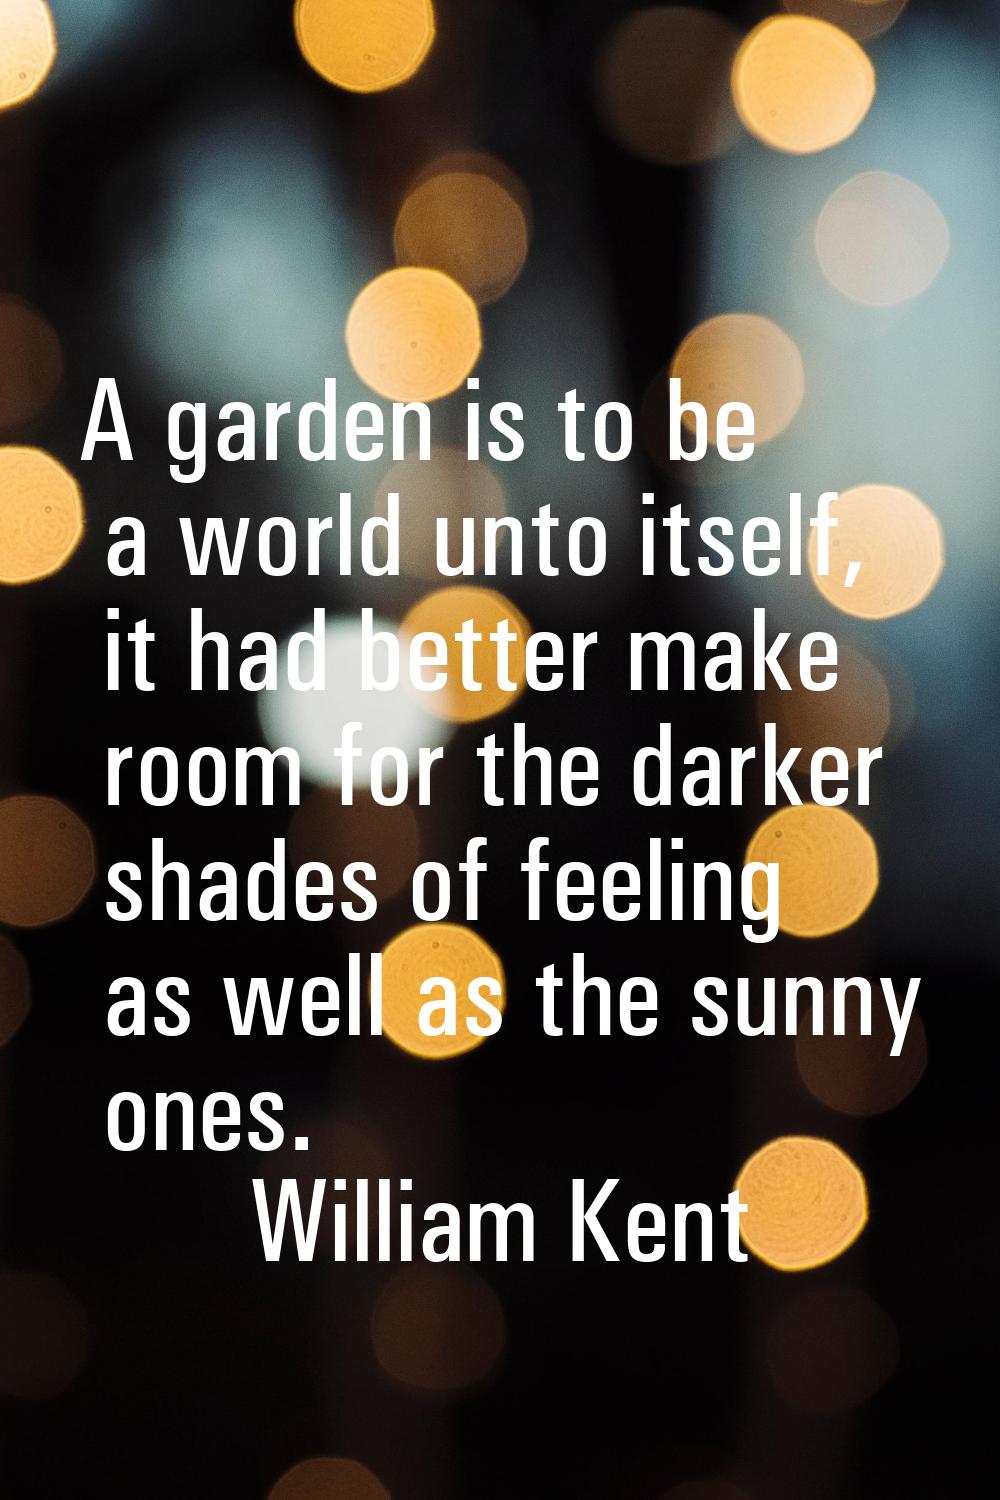 A garden is to be a world unto itself, it had better make room for the darker shades of feeling as 